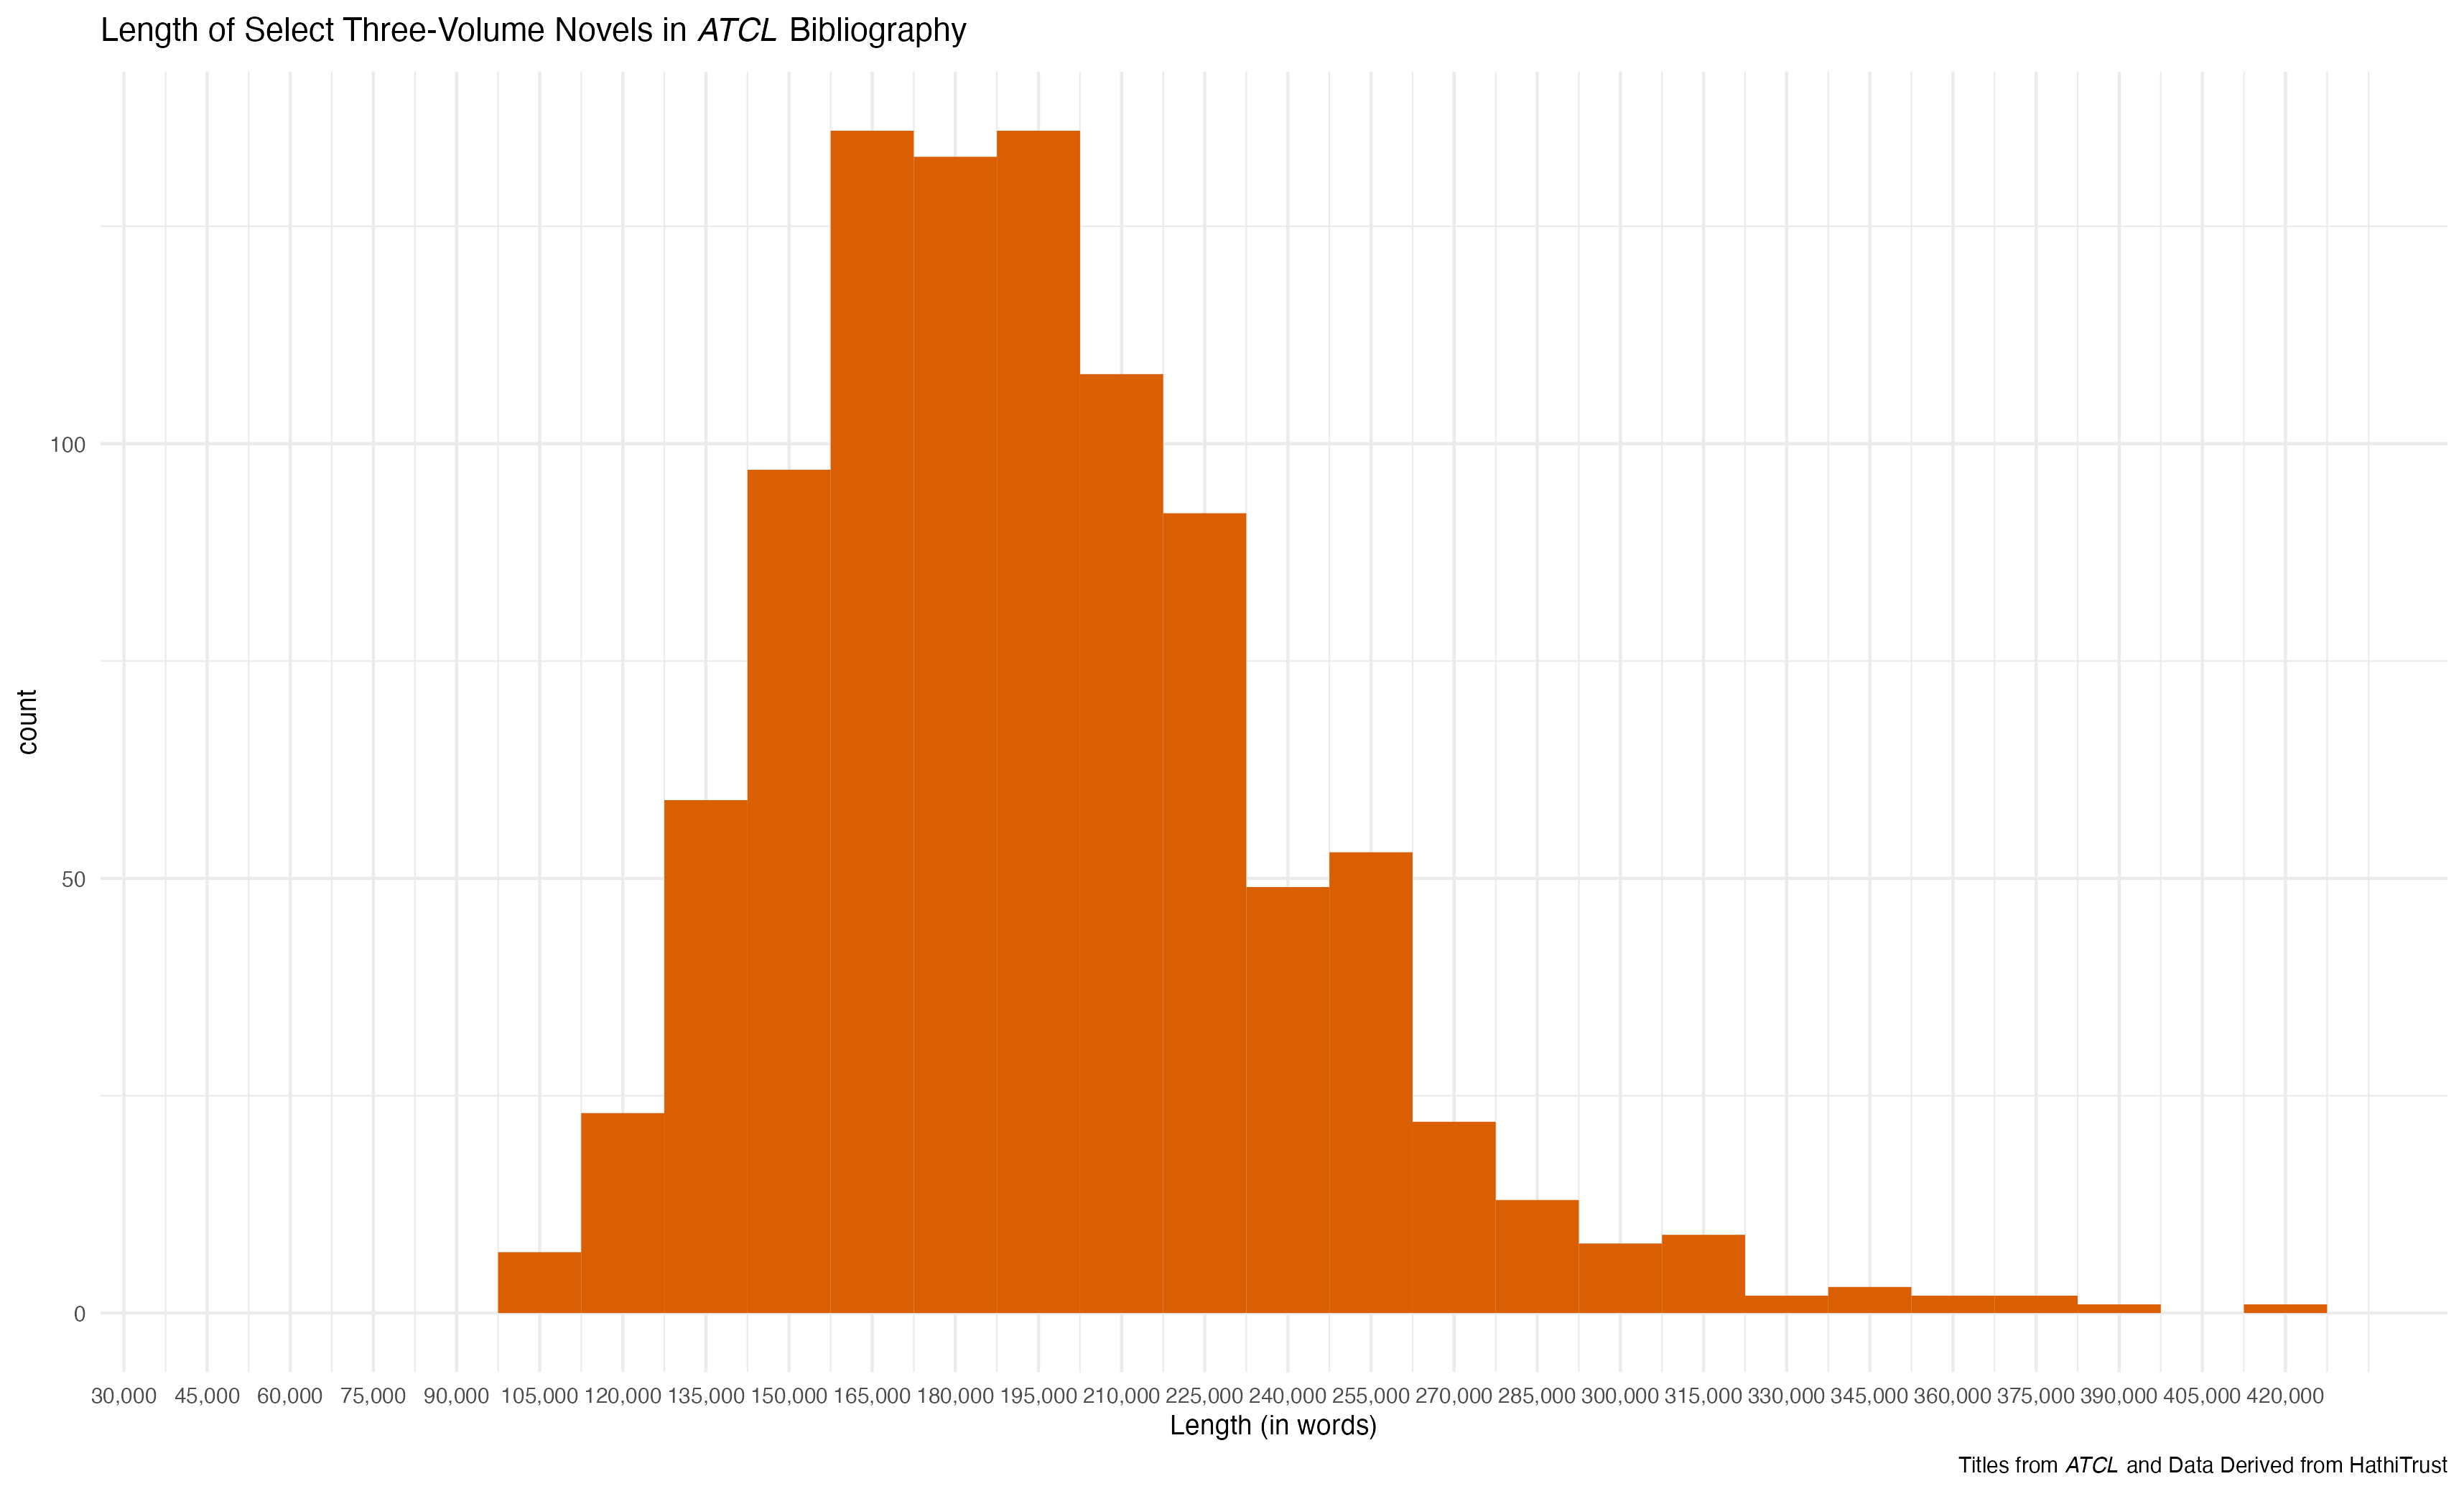 Histogram of Book Length Data Derived from HathiTrust and ATCL